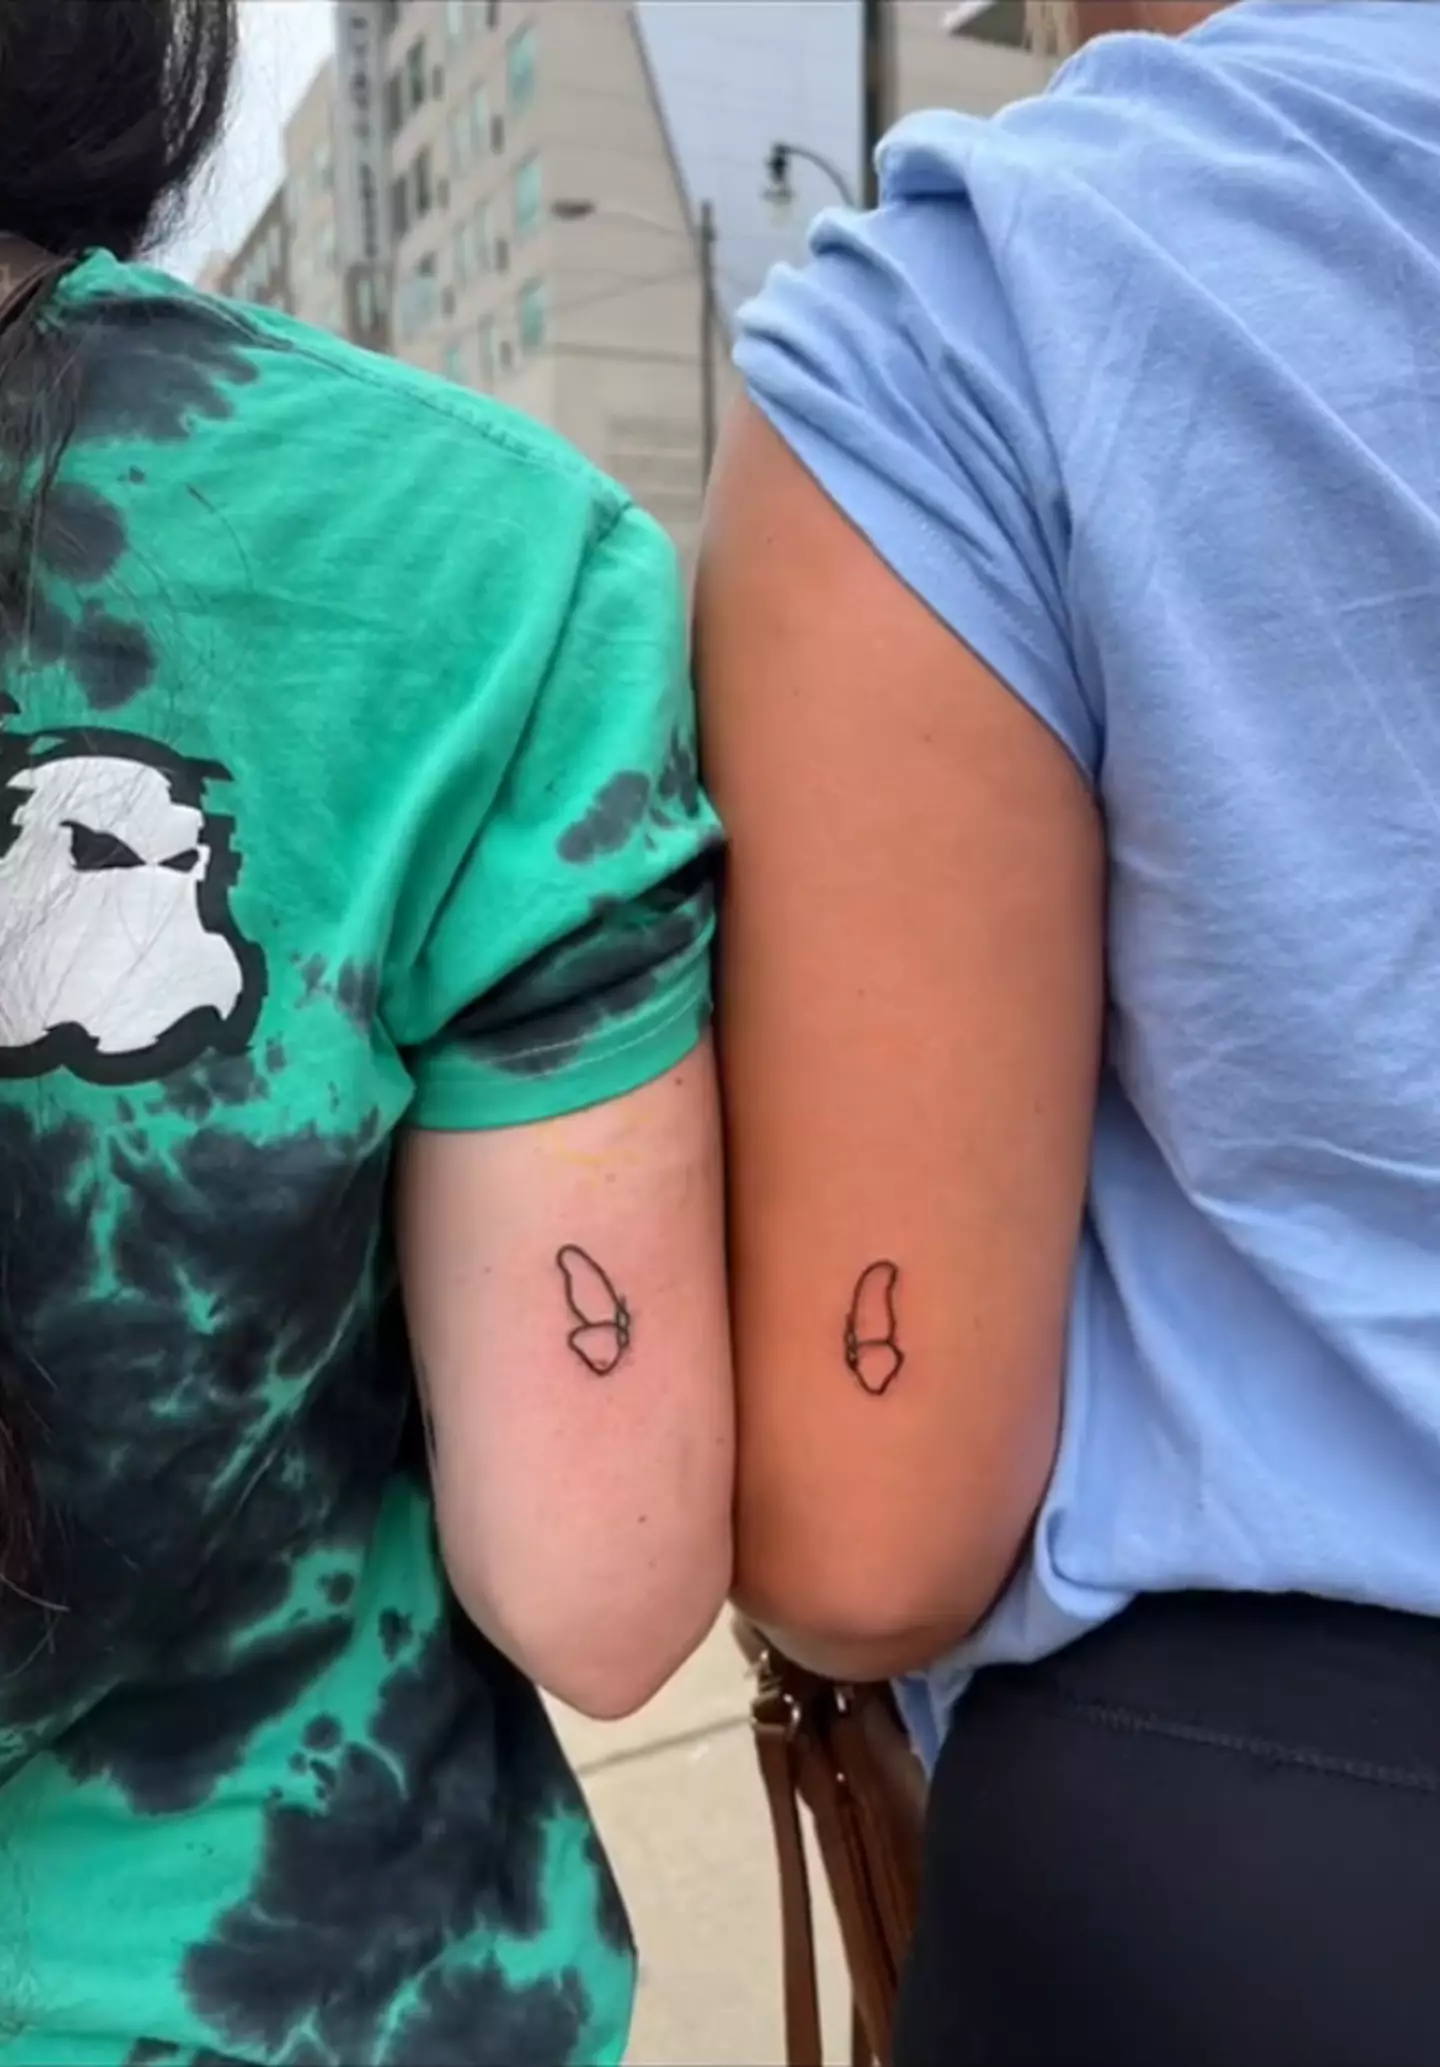 A TikTok user was left in tears after getting matching tattoos with a pal (TikTok/@lanicole001)